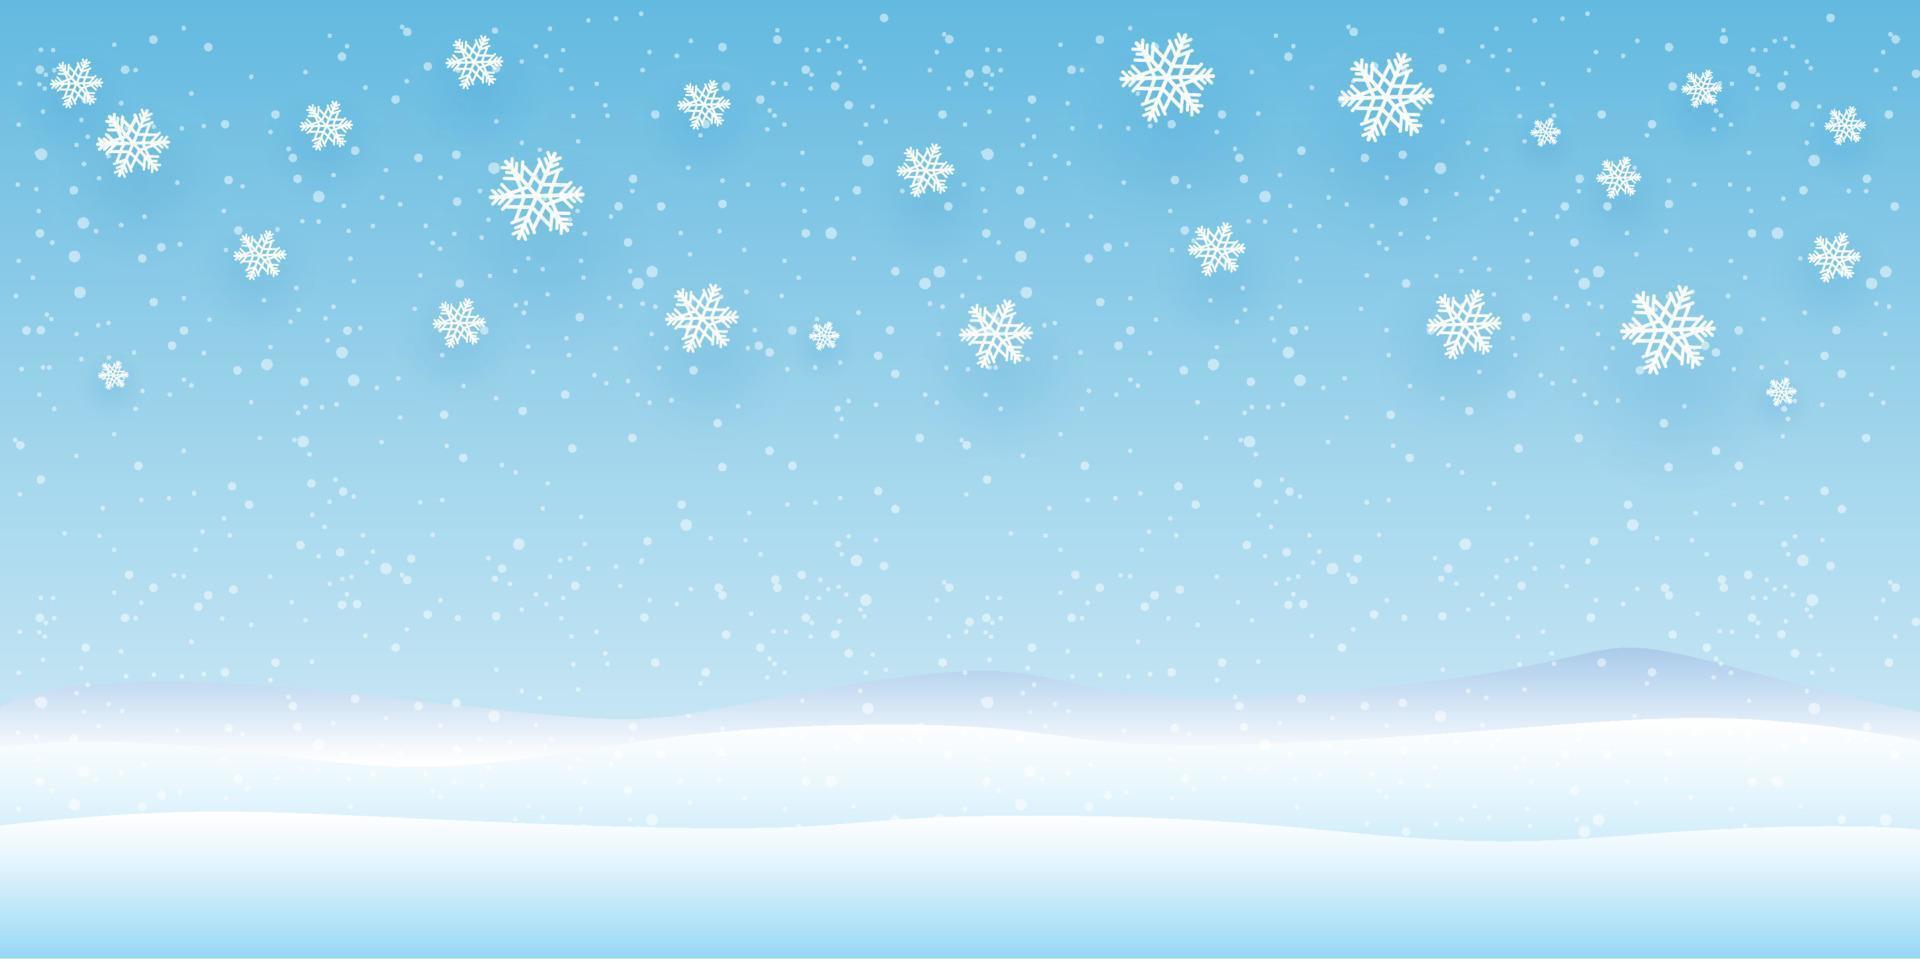 Snowflakes and Winter background, christmas posters, Winter landscape,vector design vector